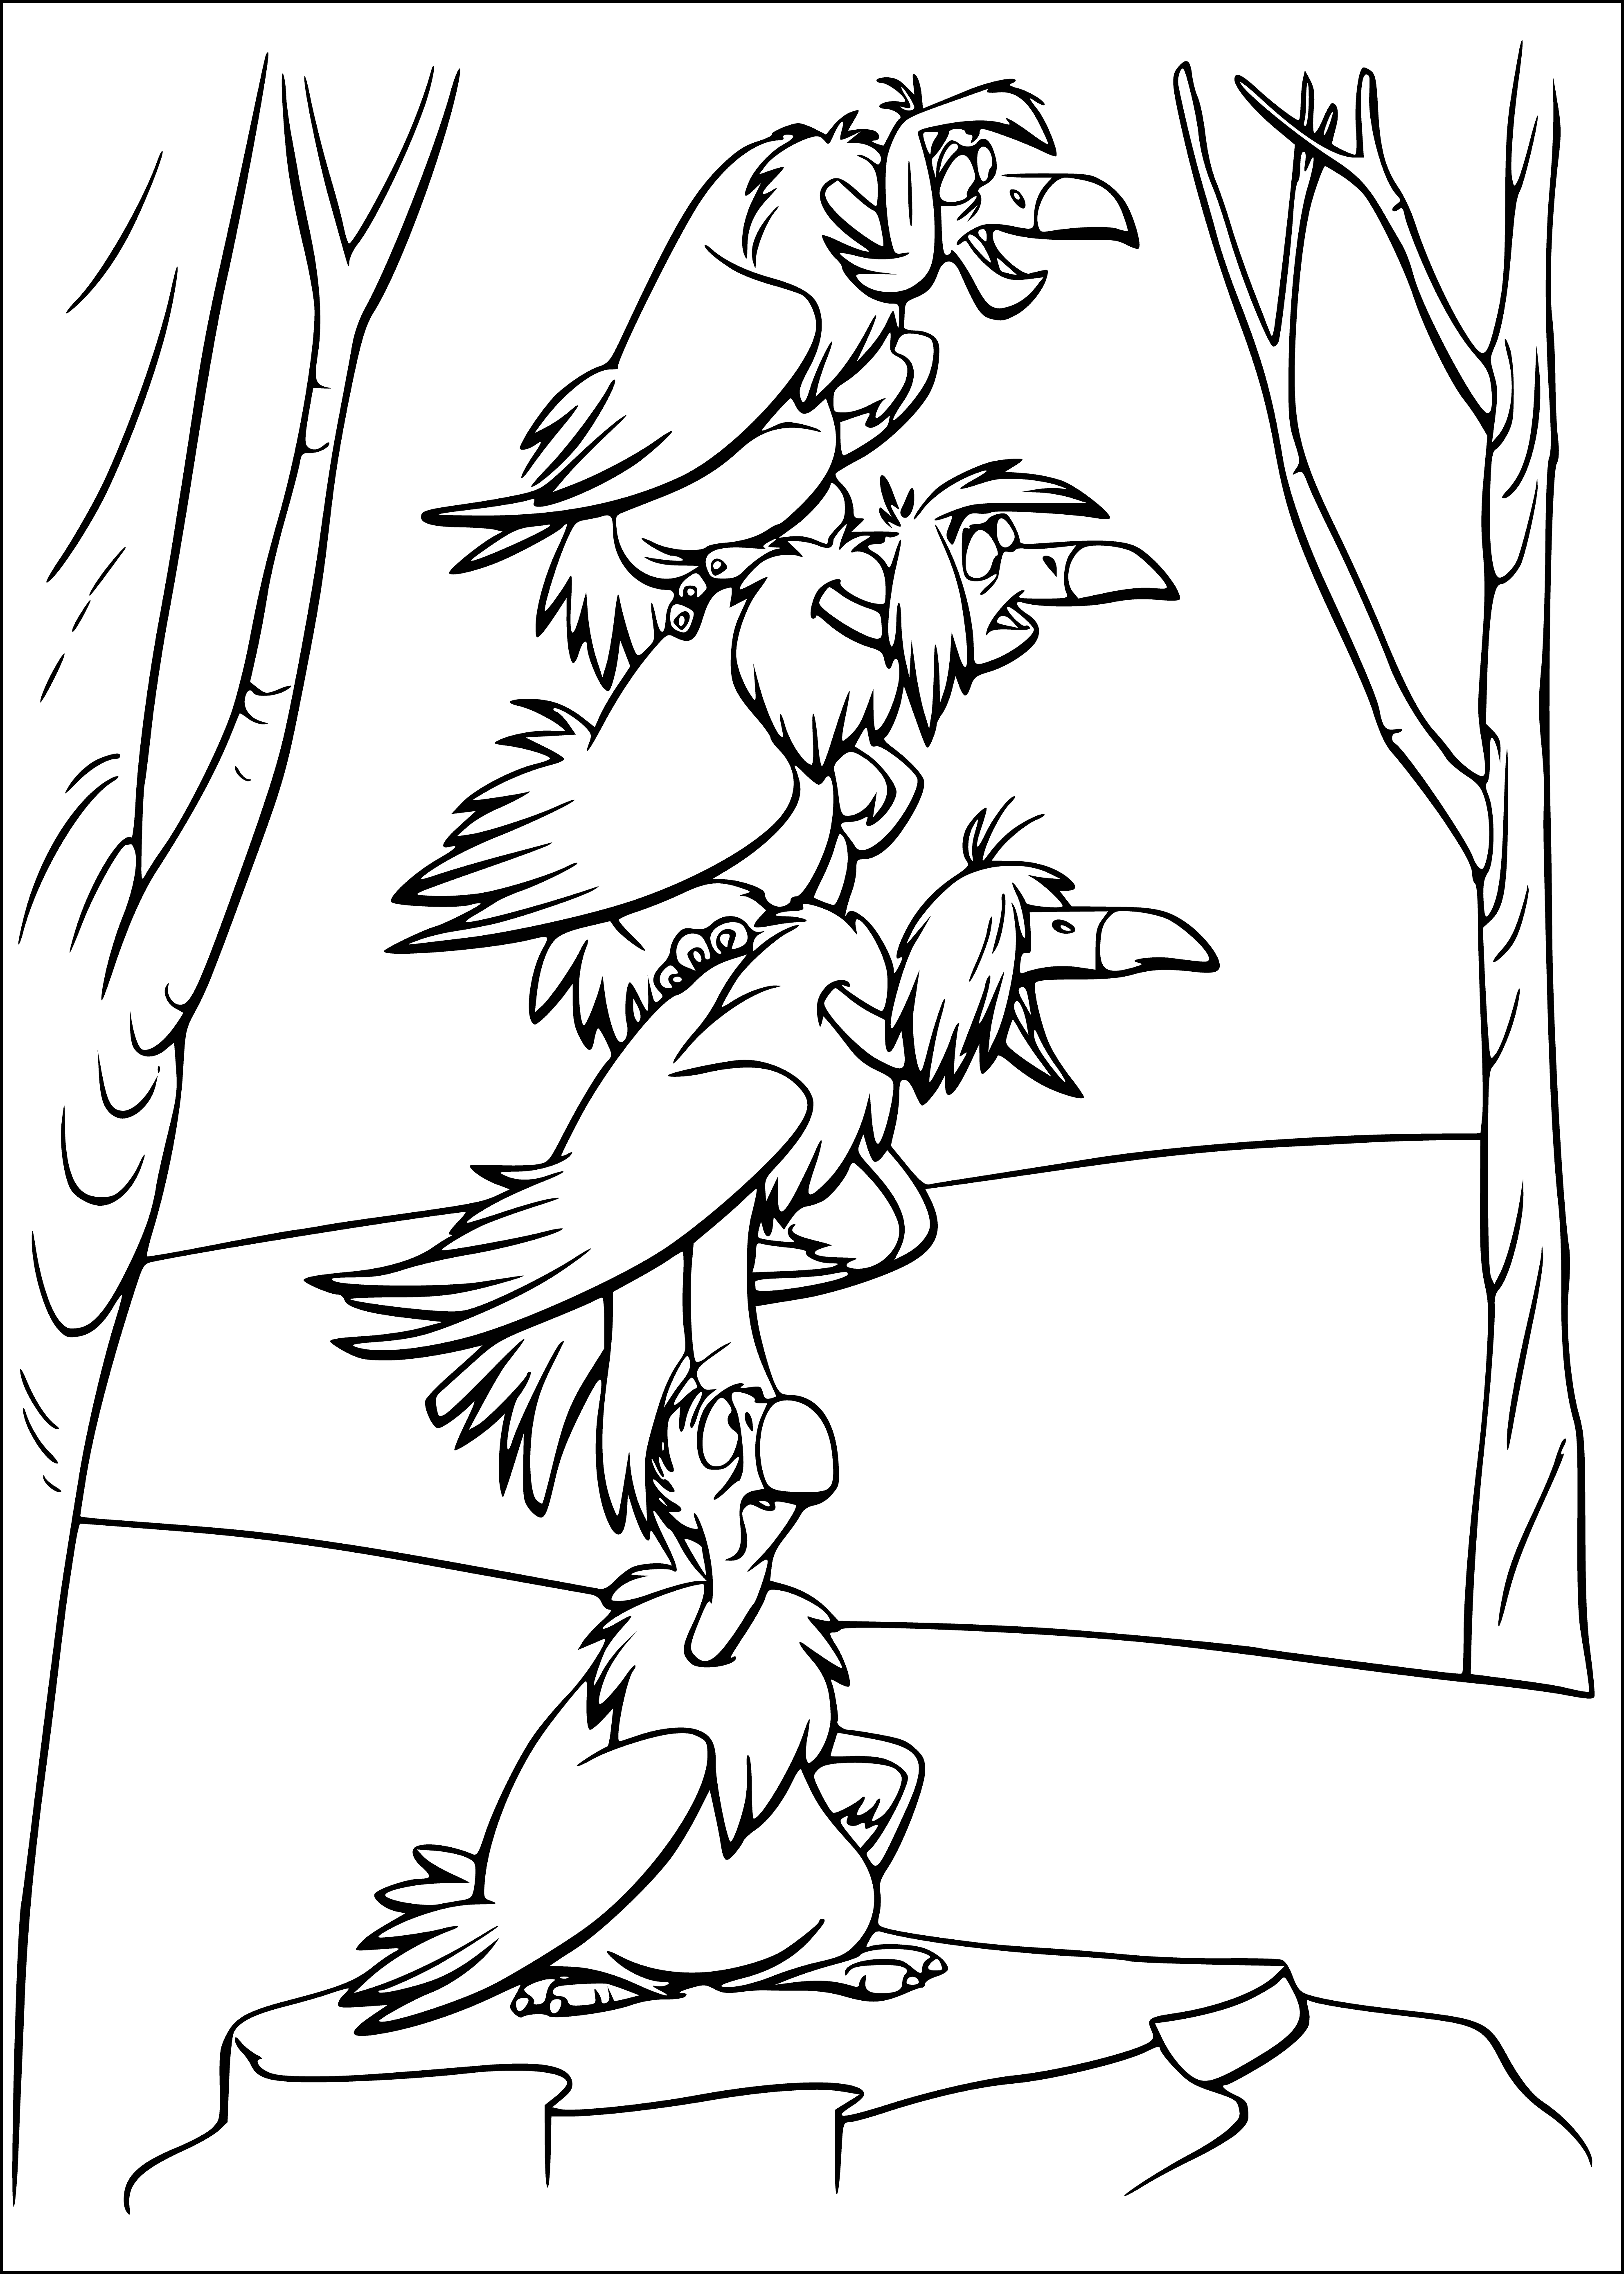 coloring page: Vultures have long necks, bare heads, black feathers, white chest, long curved beak, and sharp claws. #TheJungleBook